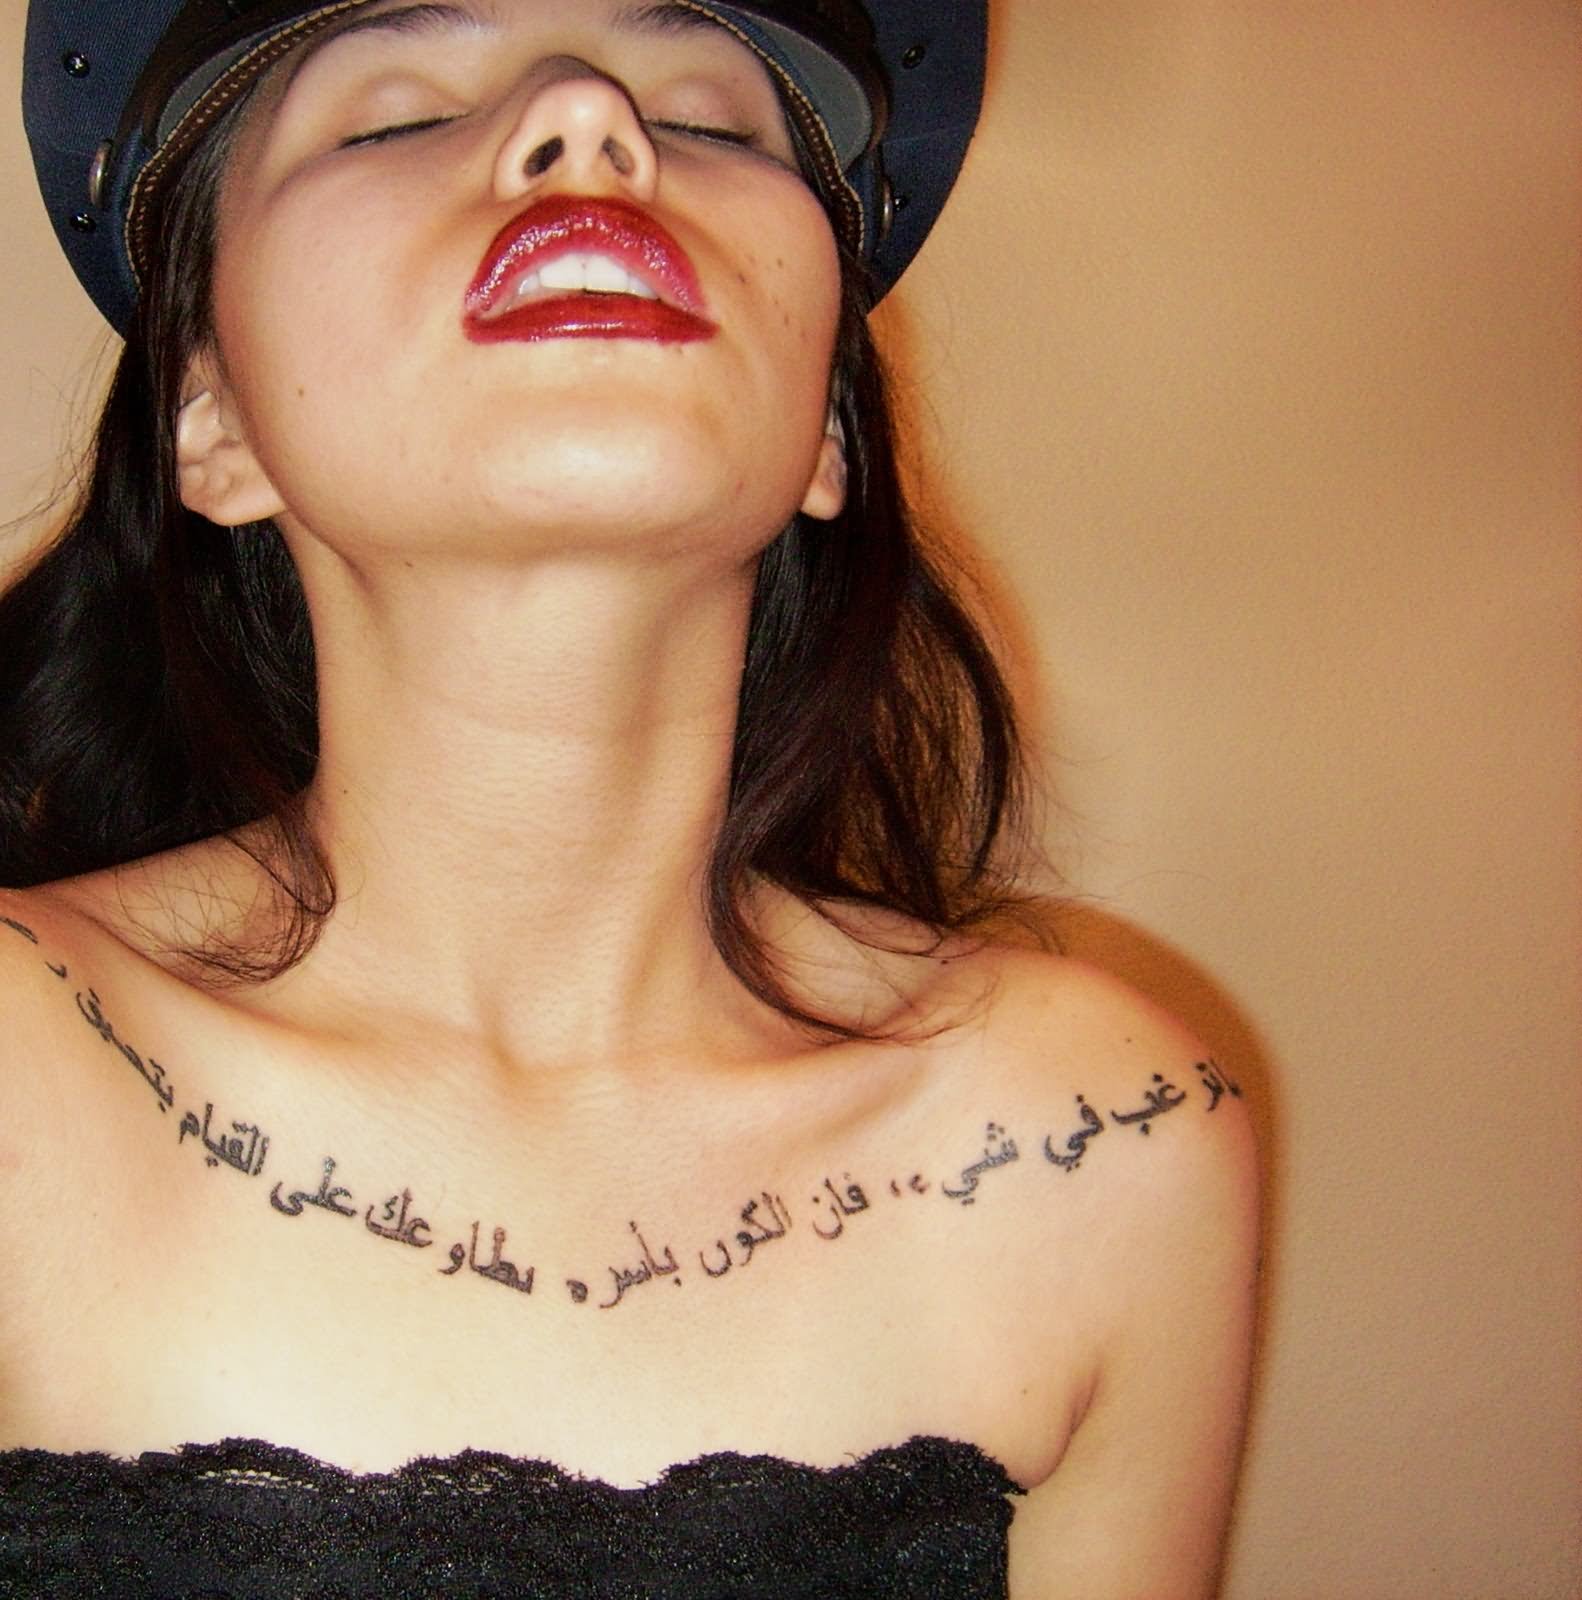 Girl With Arabic Tattoos On Collarbones